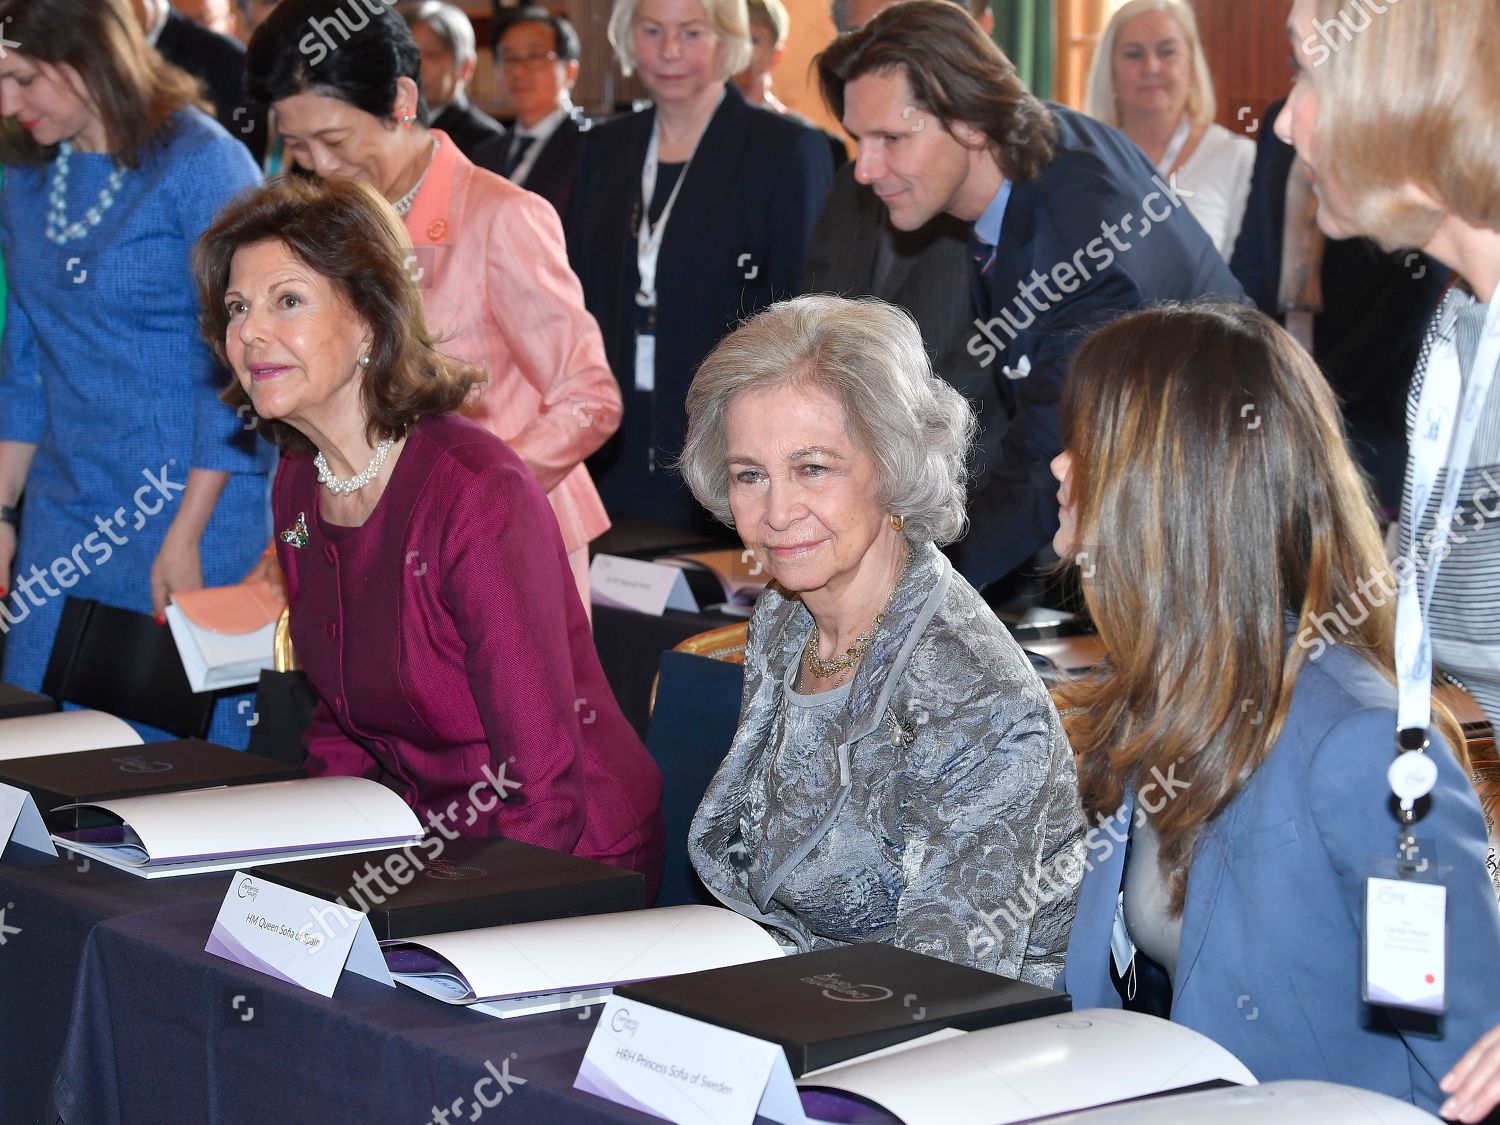 dementia-forum-x-at-the-royal-palace-stockholm-sweden-shutterstock-editorial-10237450i.jpg